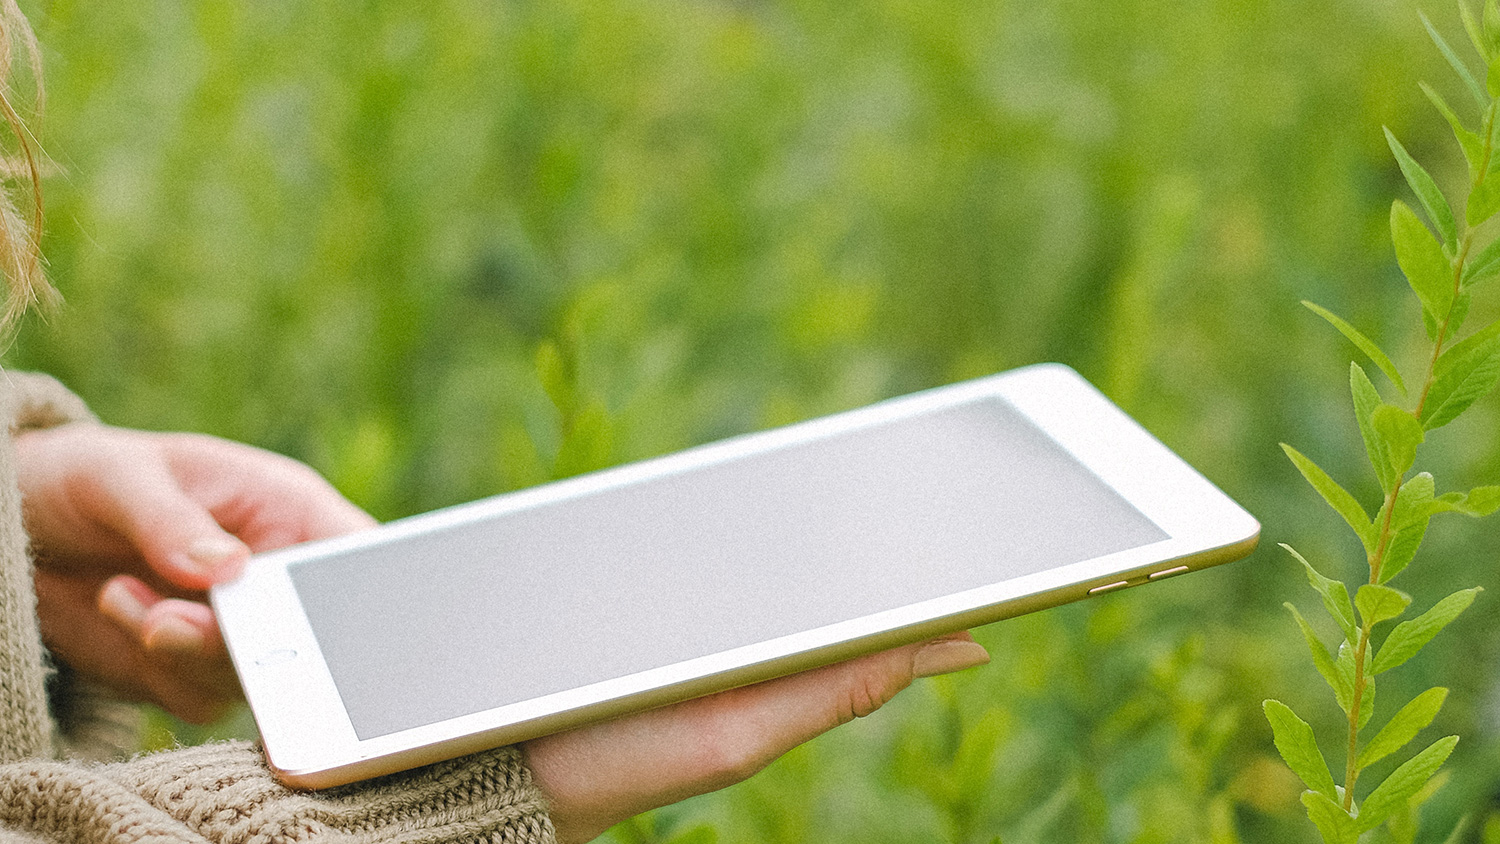 person holding an electronic tablet in a field